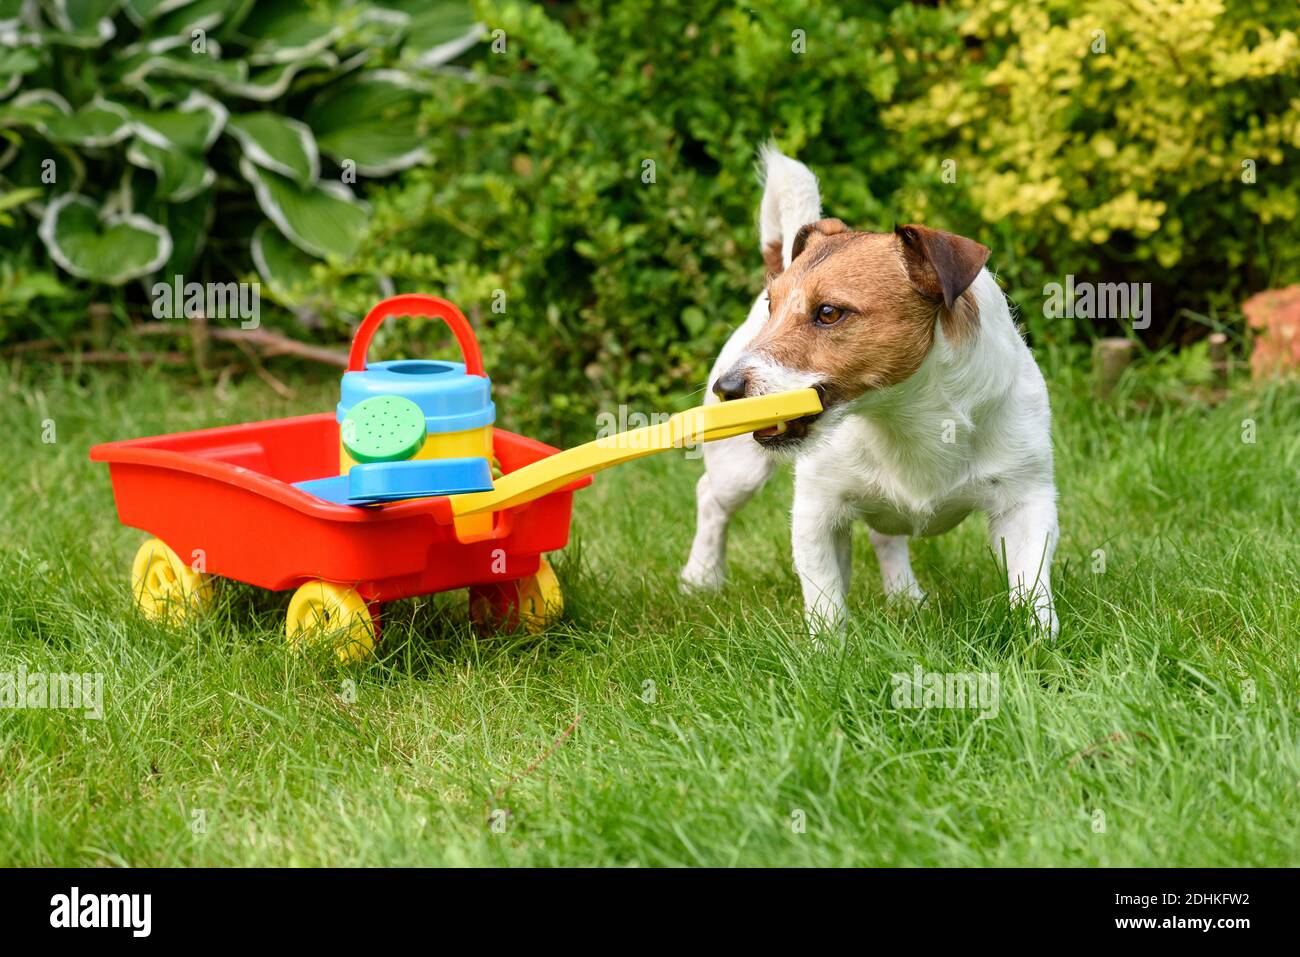 Dog pulling cart with toy garden tools as humorous concept of hobby gardening Stock Photo